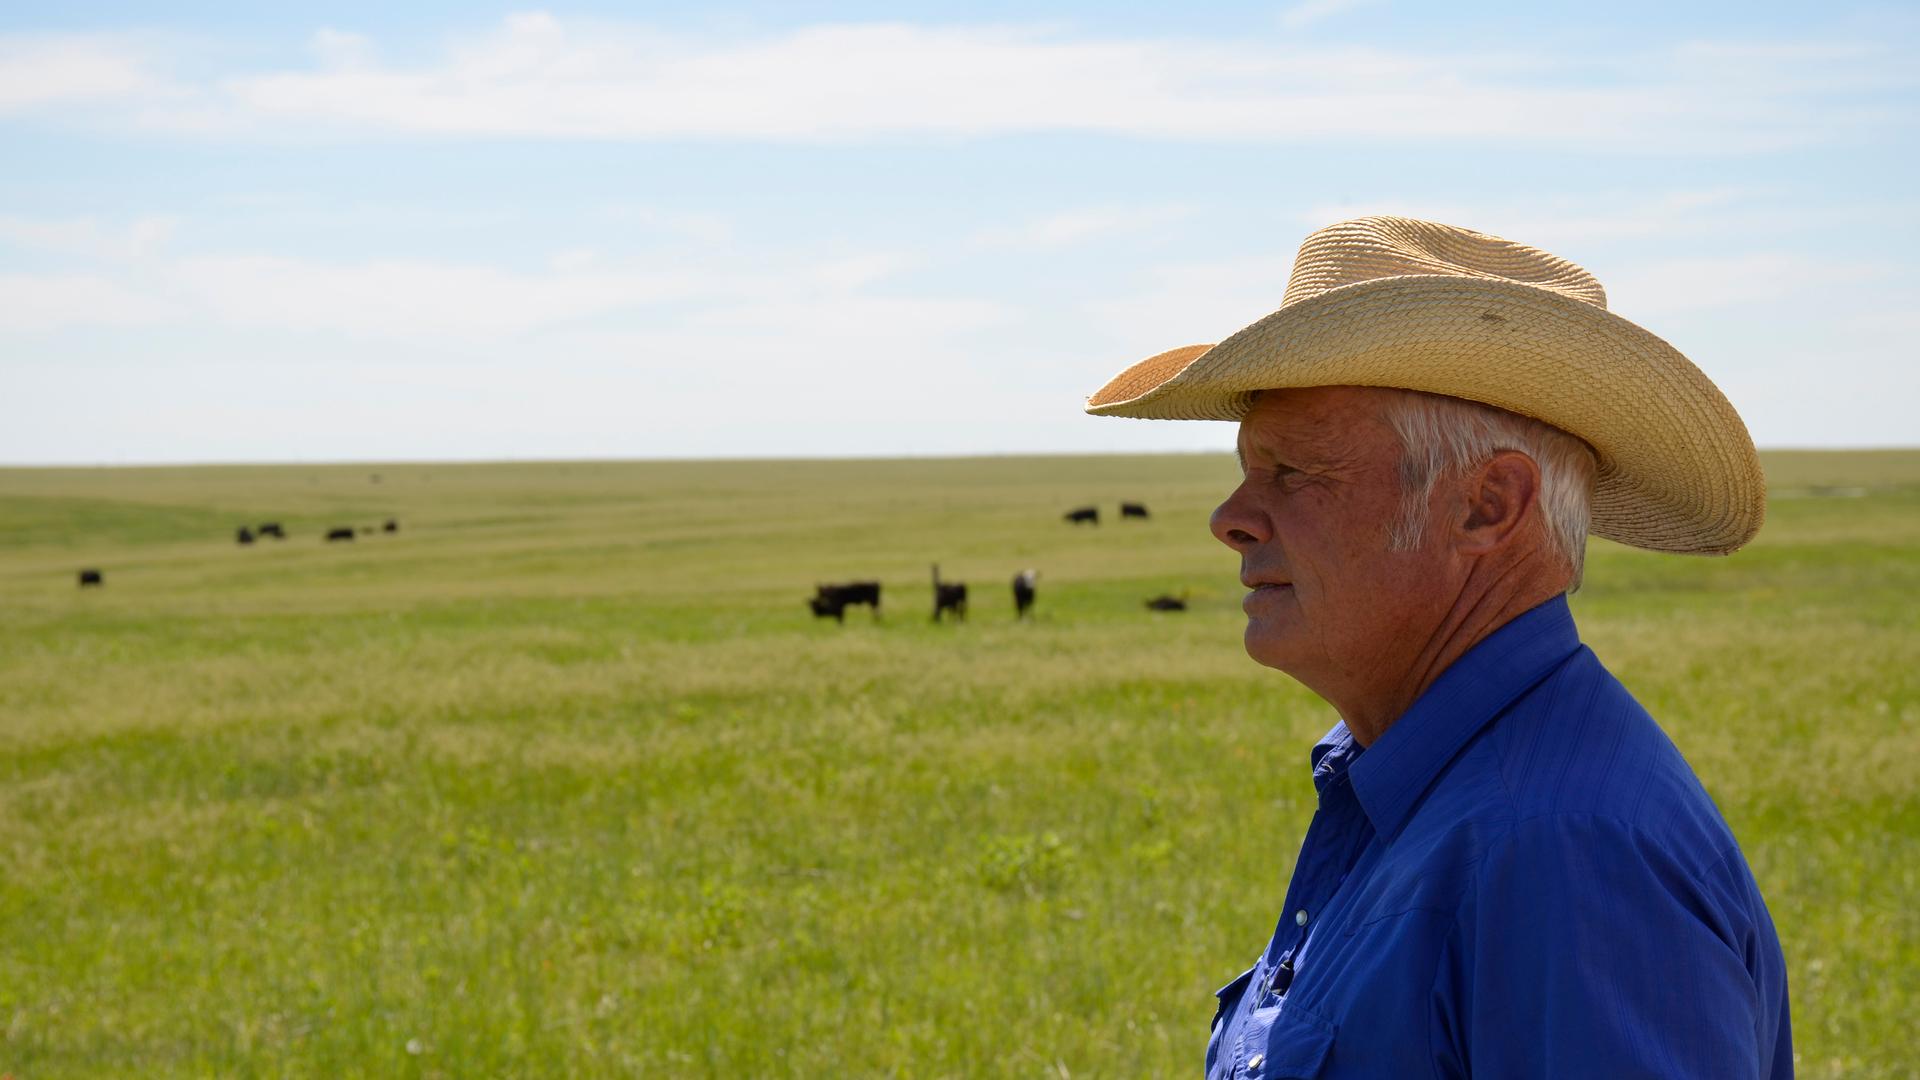 Kenny Fox at his cattle ranch in Belvidere, South Dakota. Fox, who is a third-generation South Dakota rancher, would like his sons to be able to continue in his footsteps, but worries that the economics are making it too difficult.